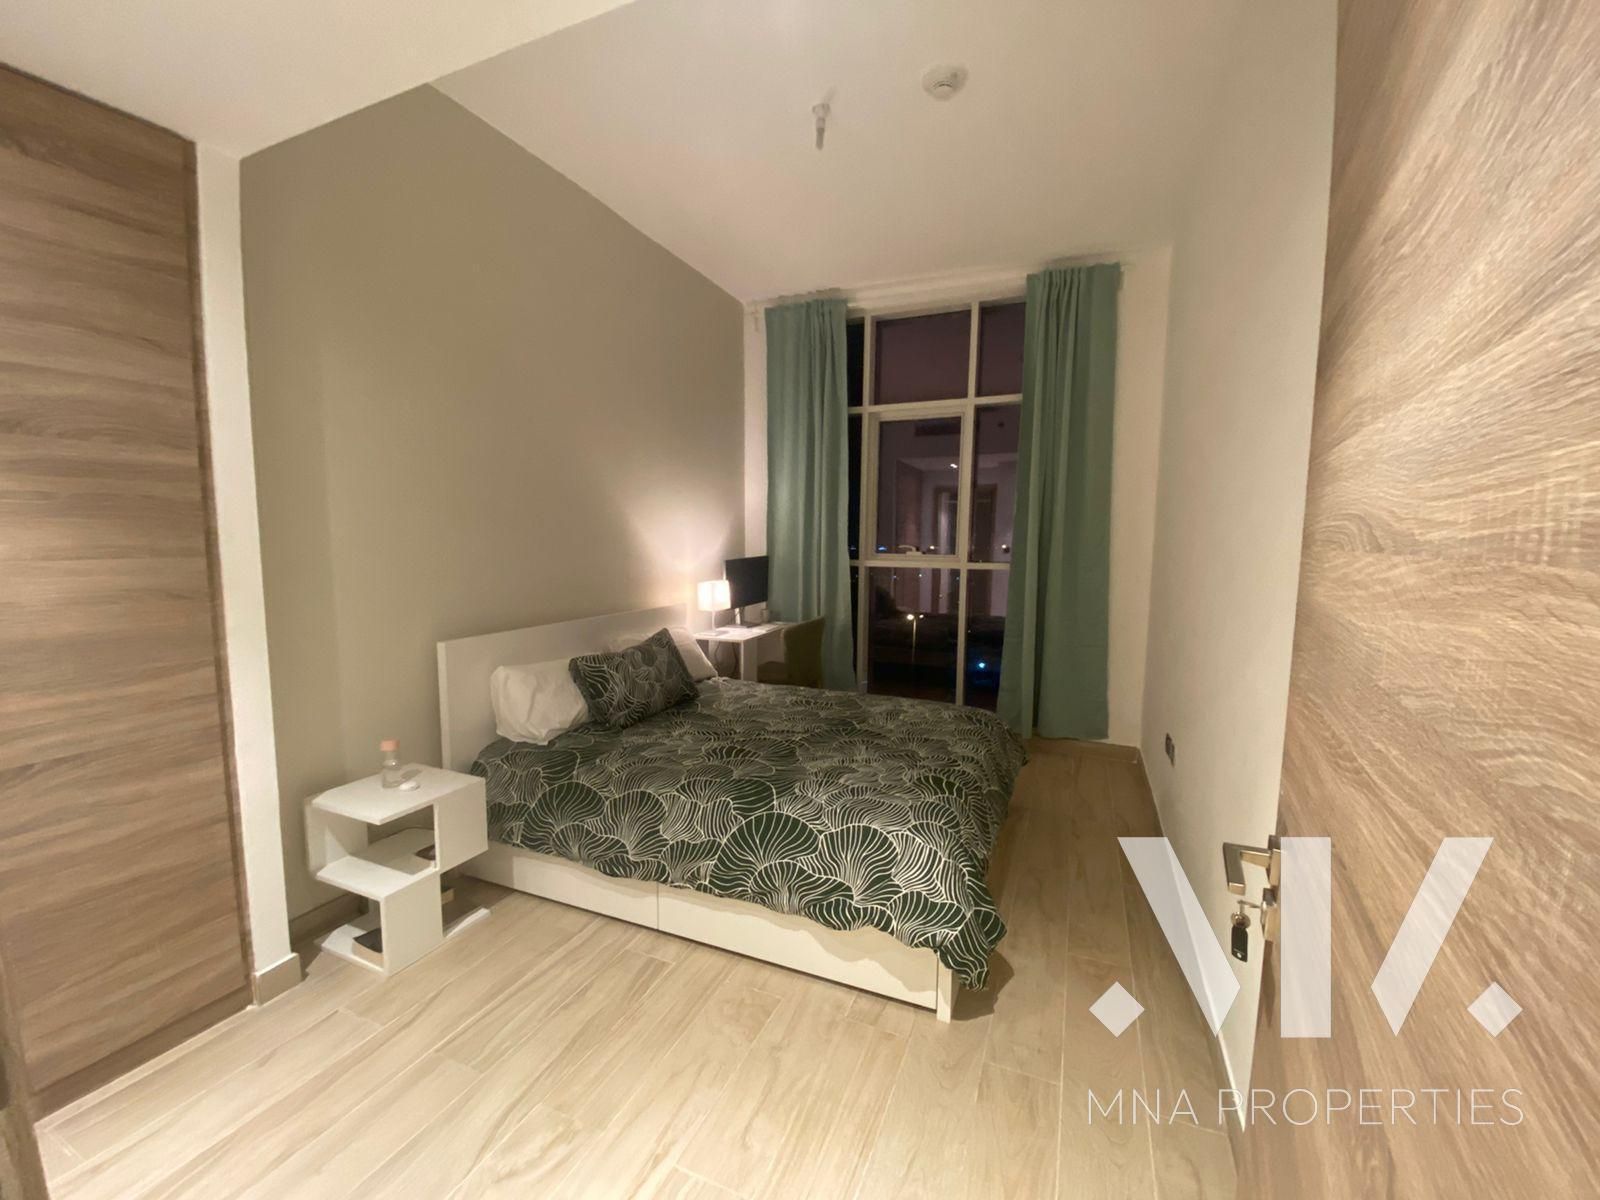 Vacant | Fully Furnished | High ROI | Studio One